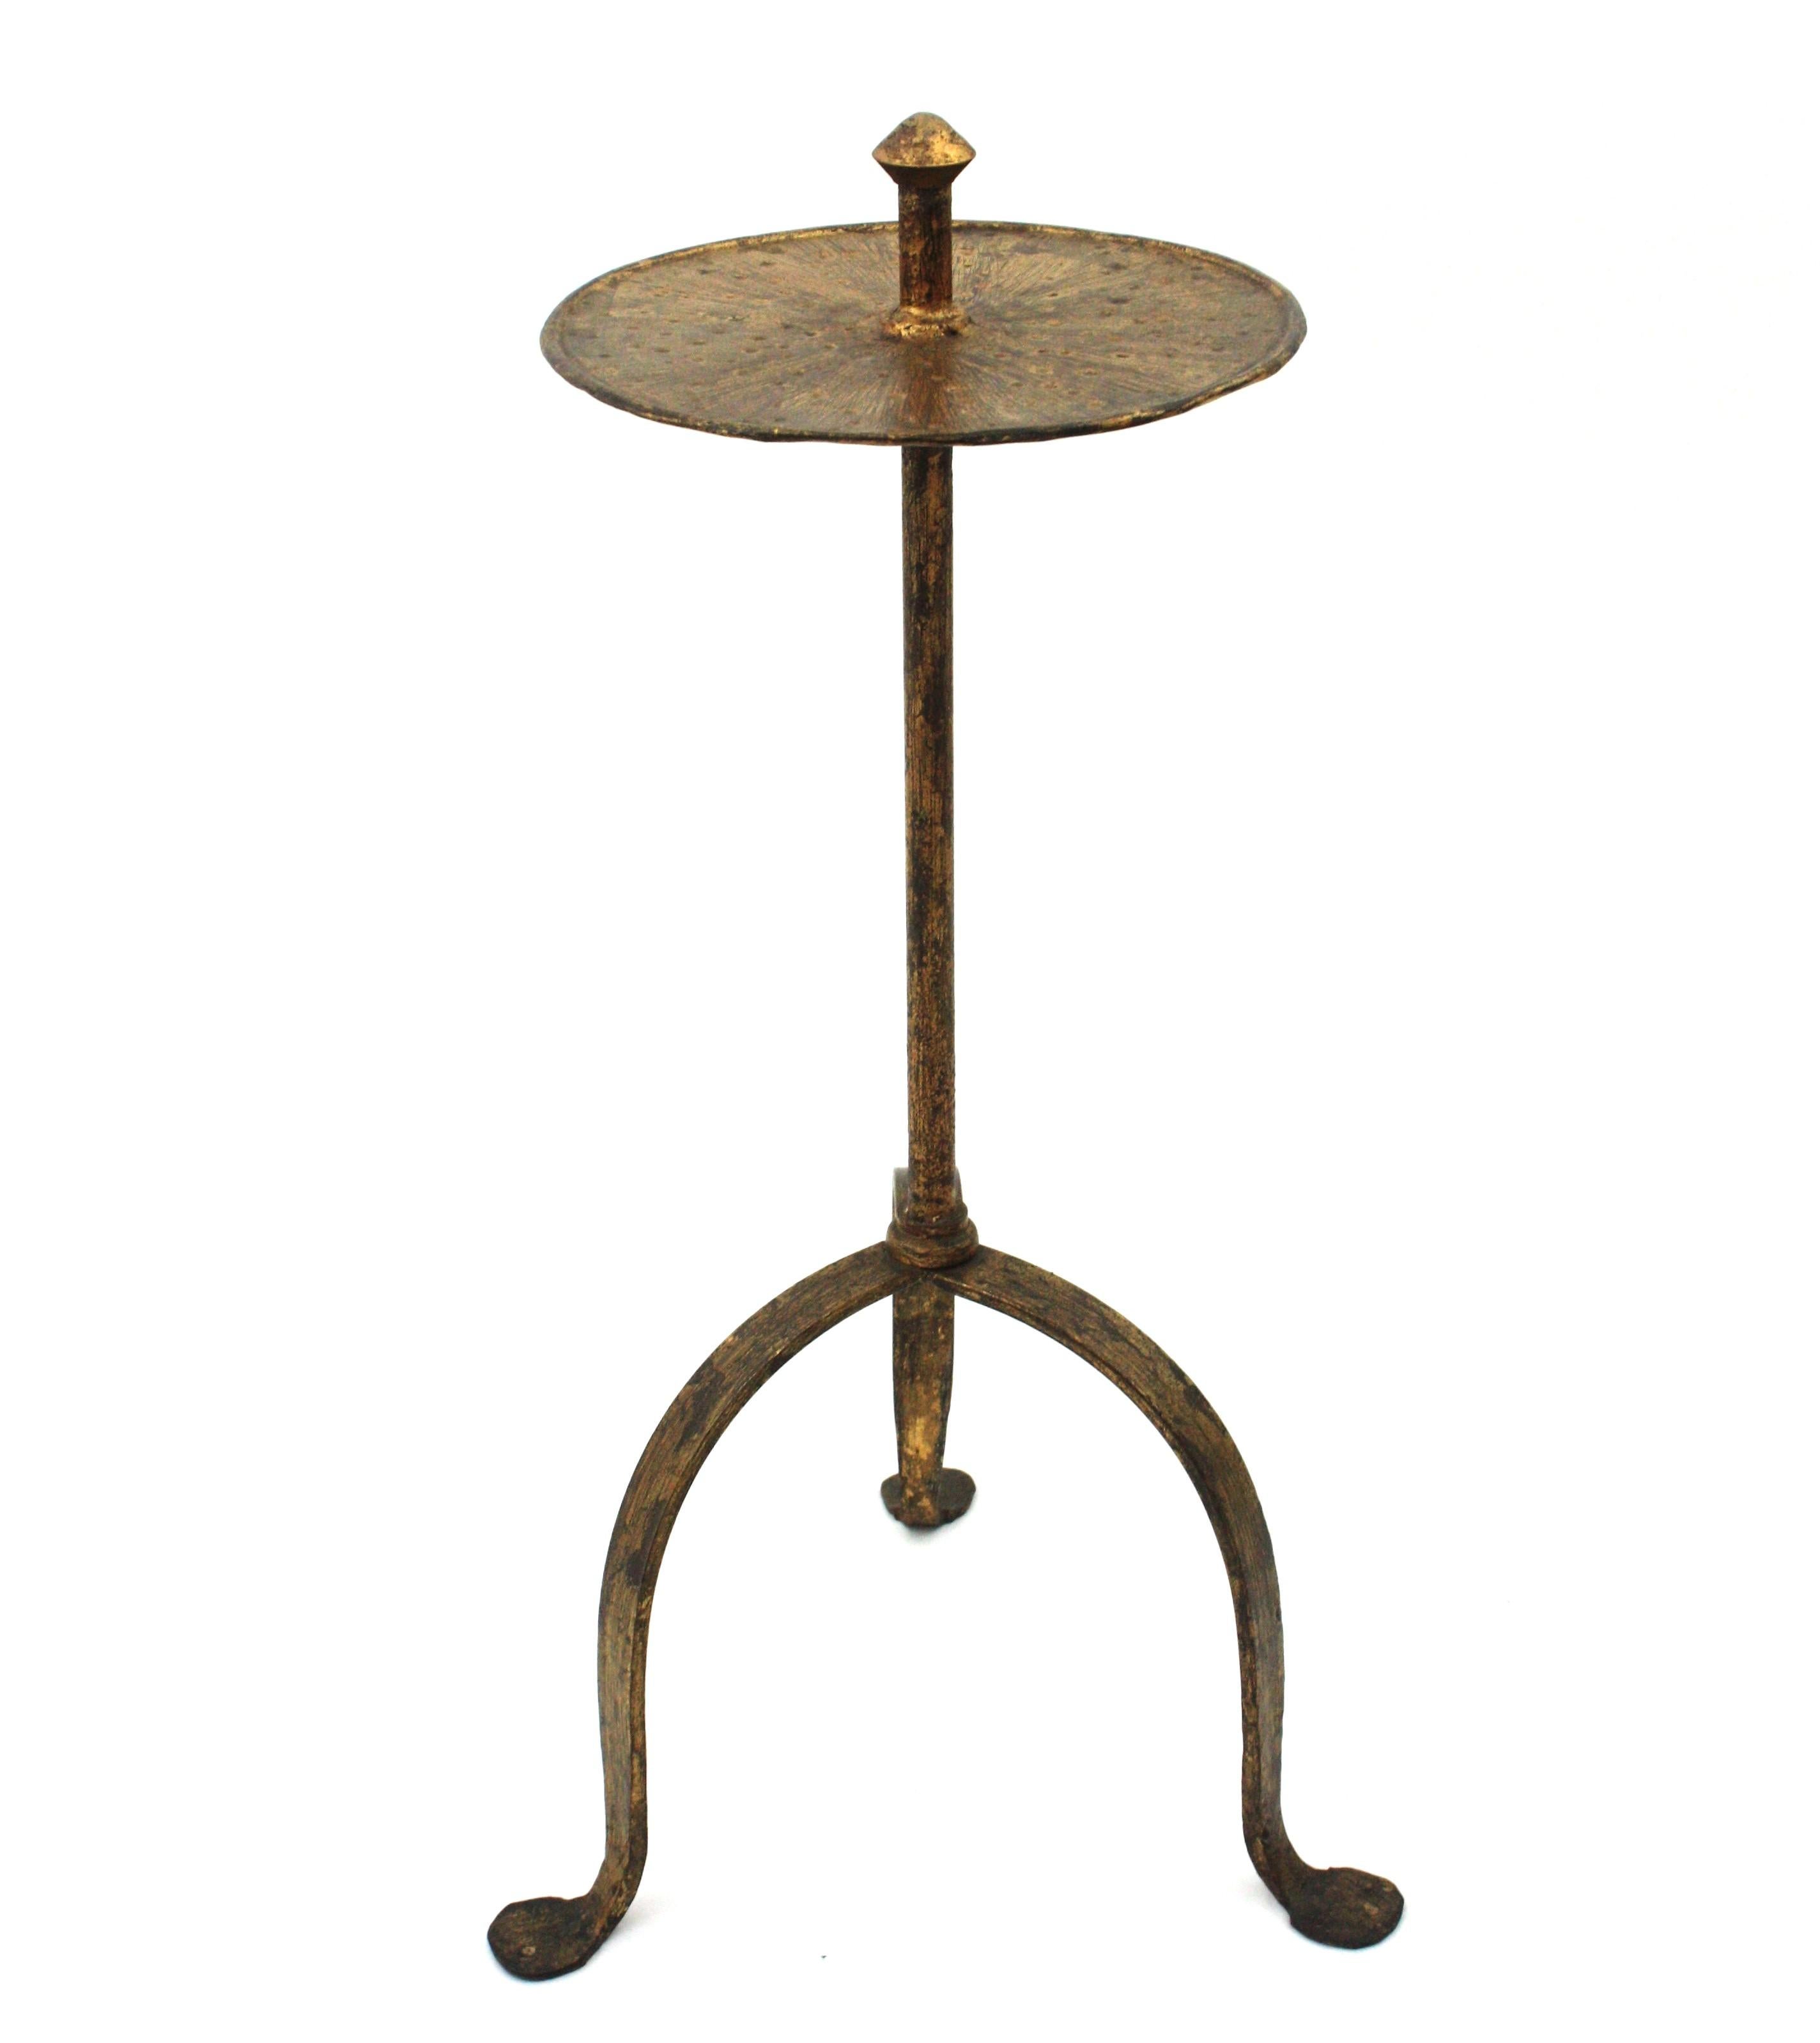 Spanish 1940s Wrought Iron Gilt Drinks Table / Side Table, Handle Detail For Sale 6